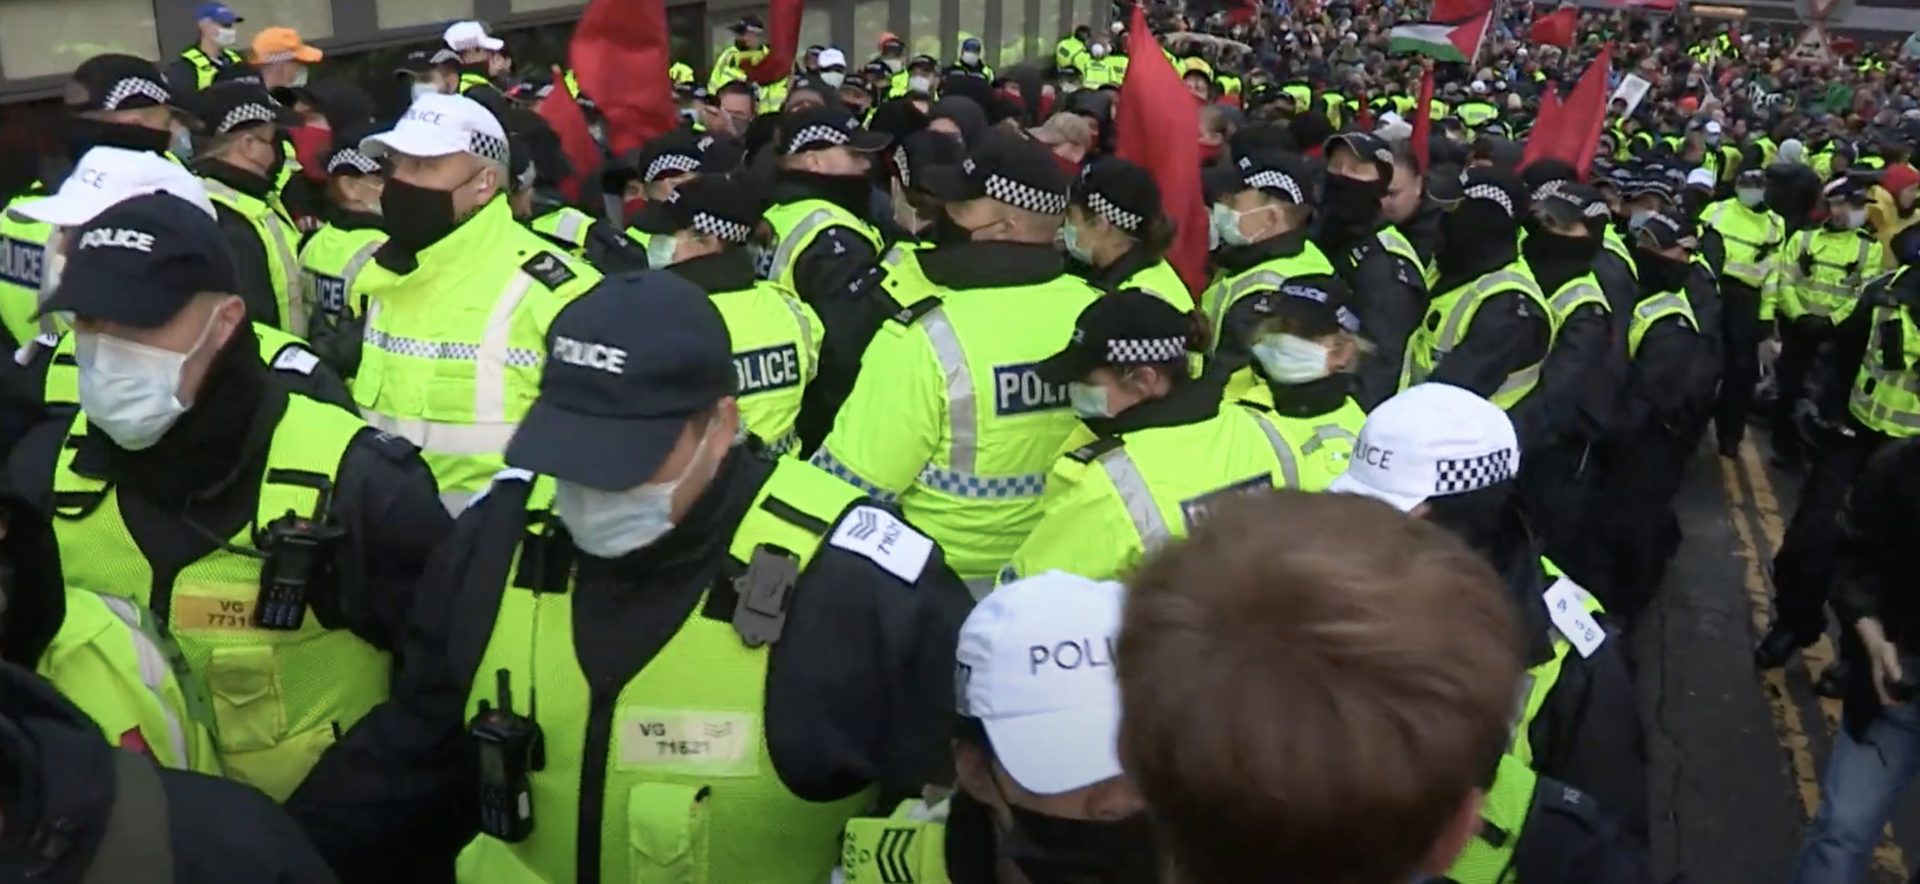 Police Scotland 'lied' about its policing of two protests during COP26, according to new report 7